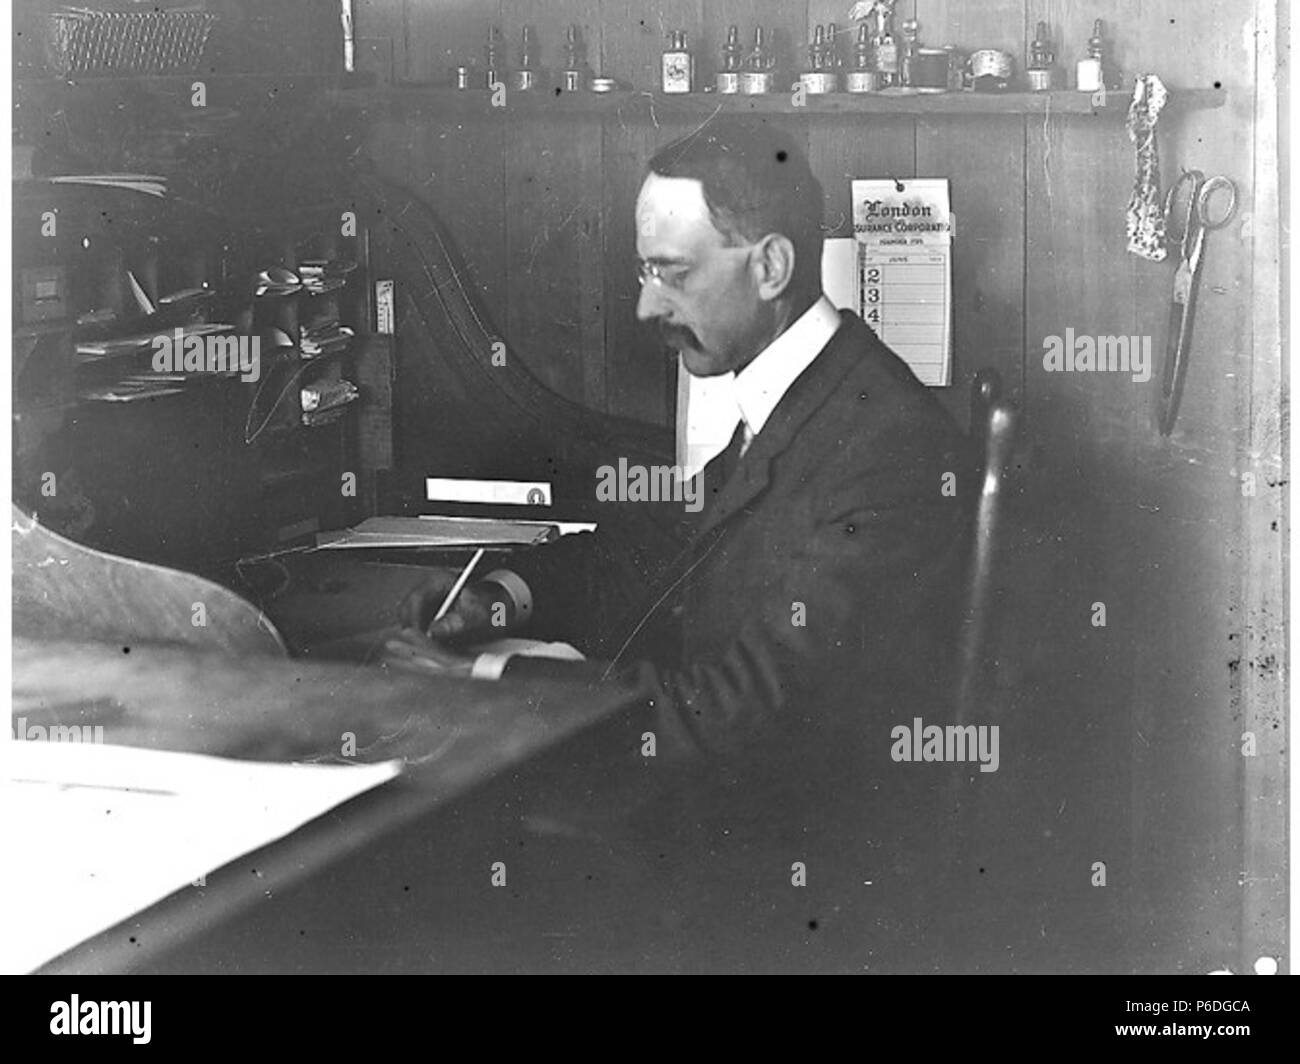 . English: H. Ambrose Kiehl in engineer's office at Fort Lawton, Washington, 1905 . English: Text from Kiehl log: H.A.K. office at Fort Lawton. 1905. Album 1.059 Subjects (LCSH): Kiehl, H. Ambrose; Engineers--Washington (State)--Fort Lawton (Seattle); Military bases--Washington (State)--Seattle; Fort Lawton (Seattle, Wash.)  . 1905 51 H Ambrose Kiehl in engineer's office at Fort Lawton, Washington, 1905 (KIEHL 229) Stock Photo